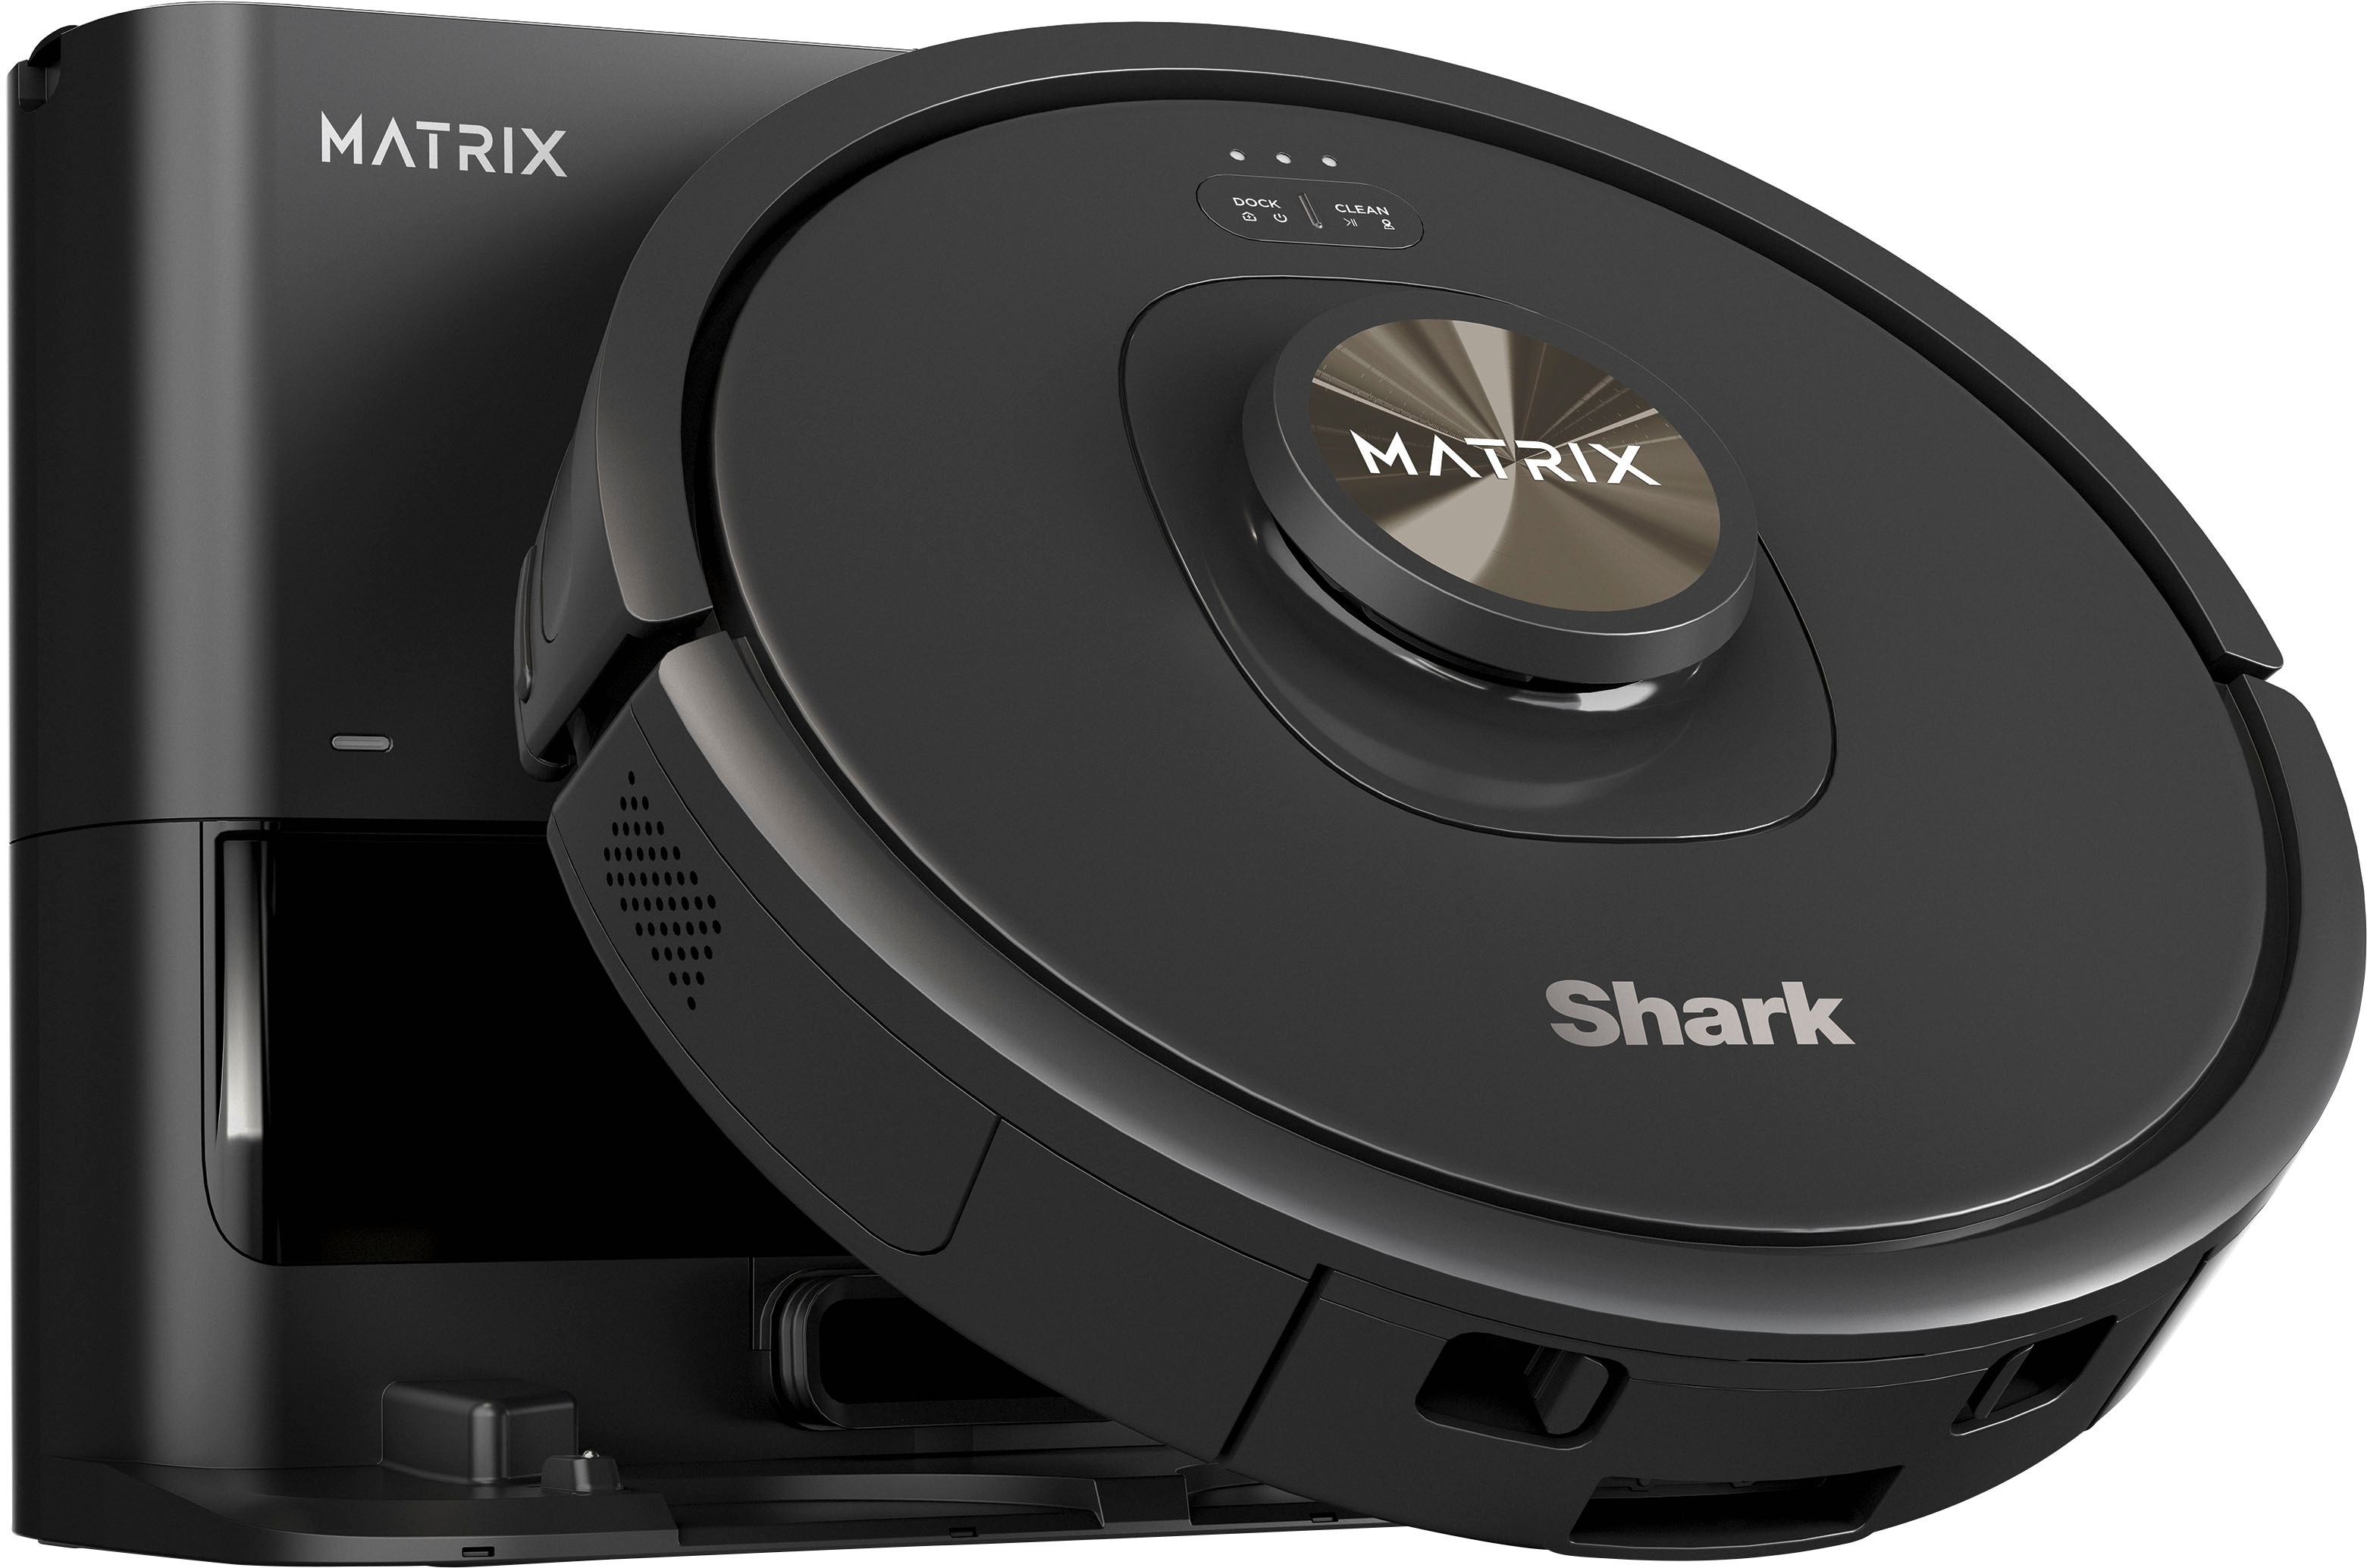 Shark Matrix Self-Emptying Robot Vacuum with Precision Home Mapping and ...